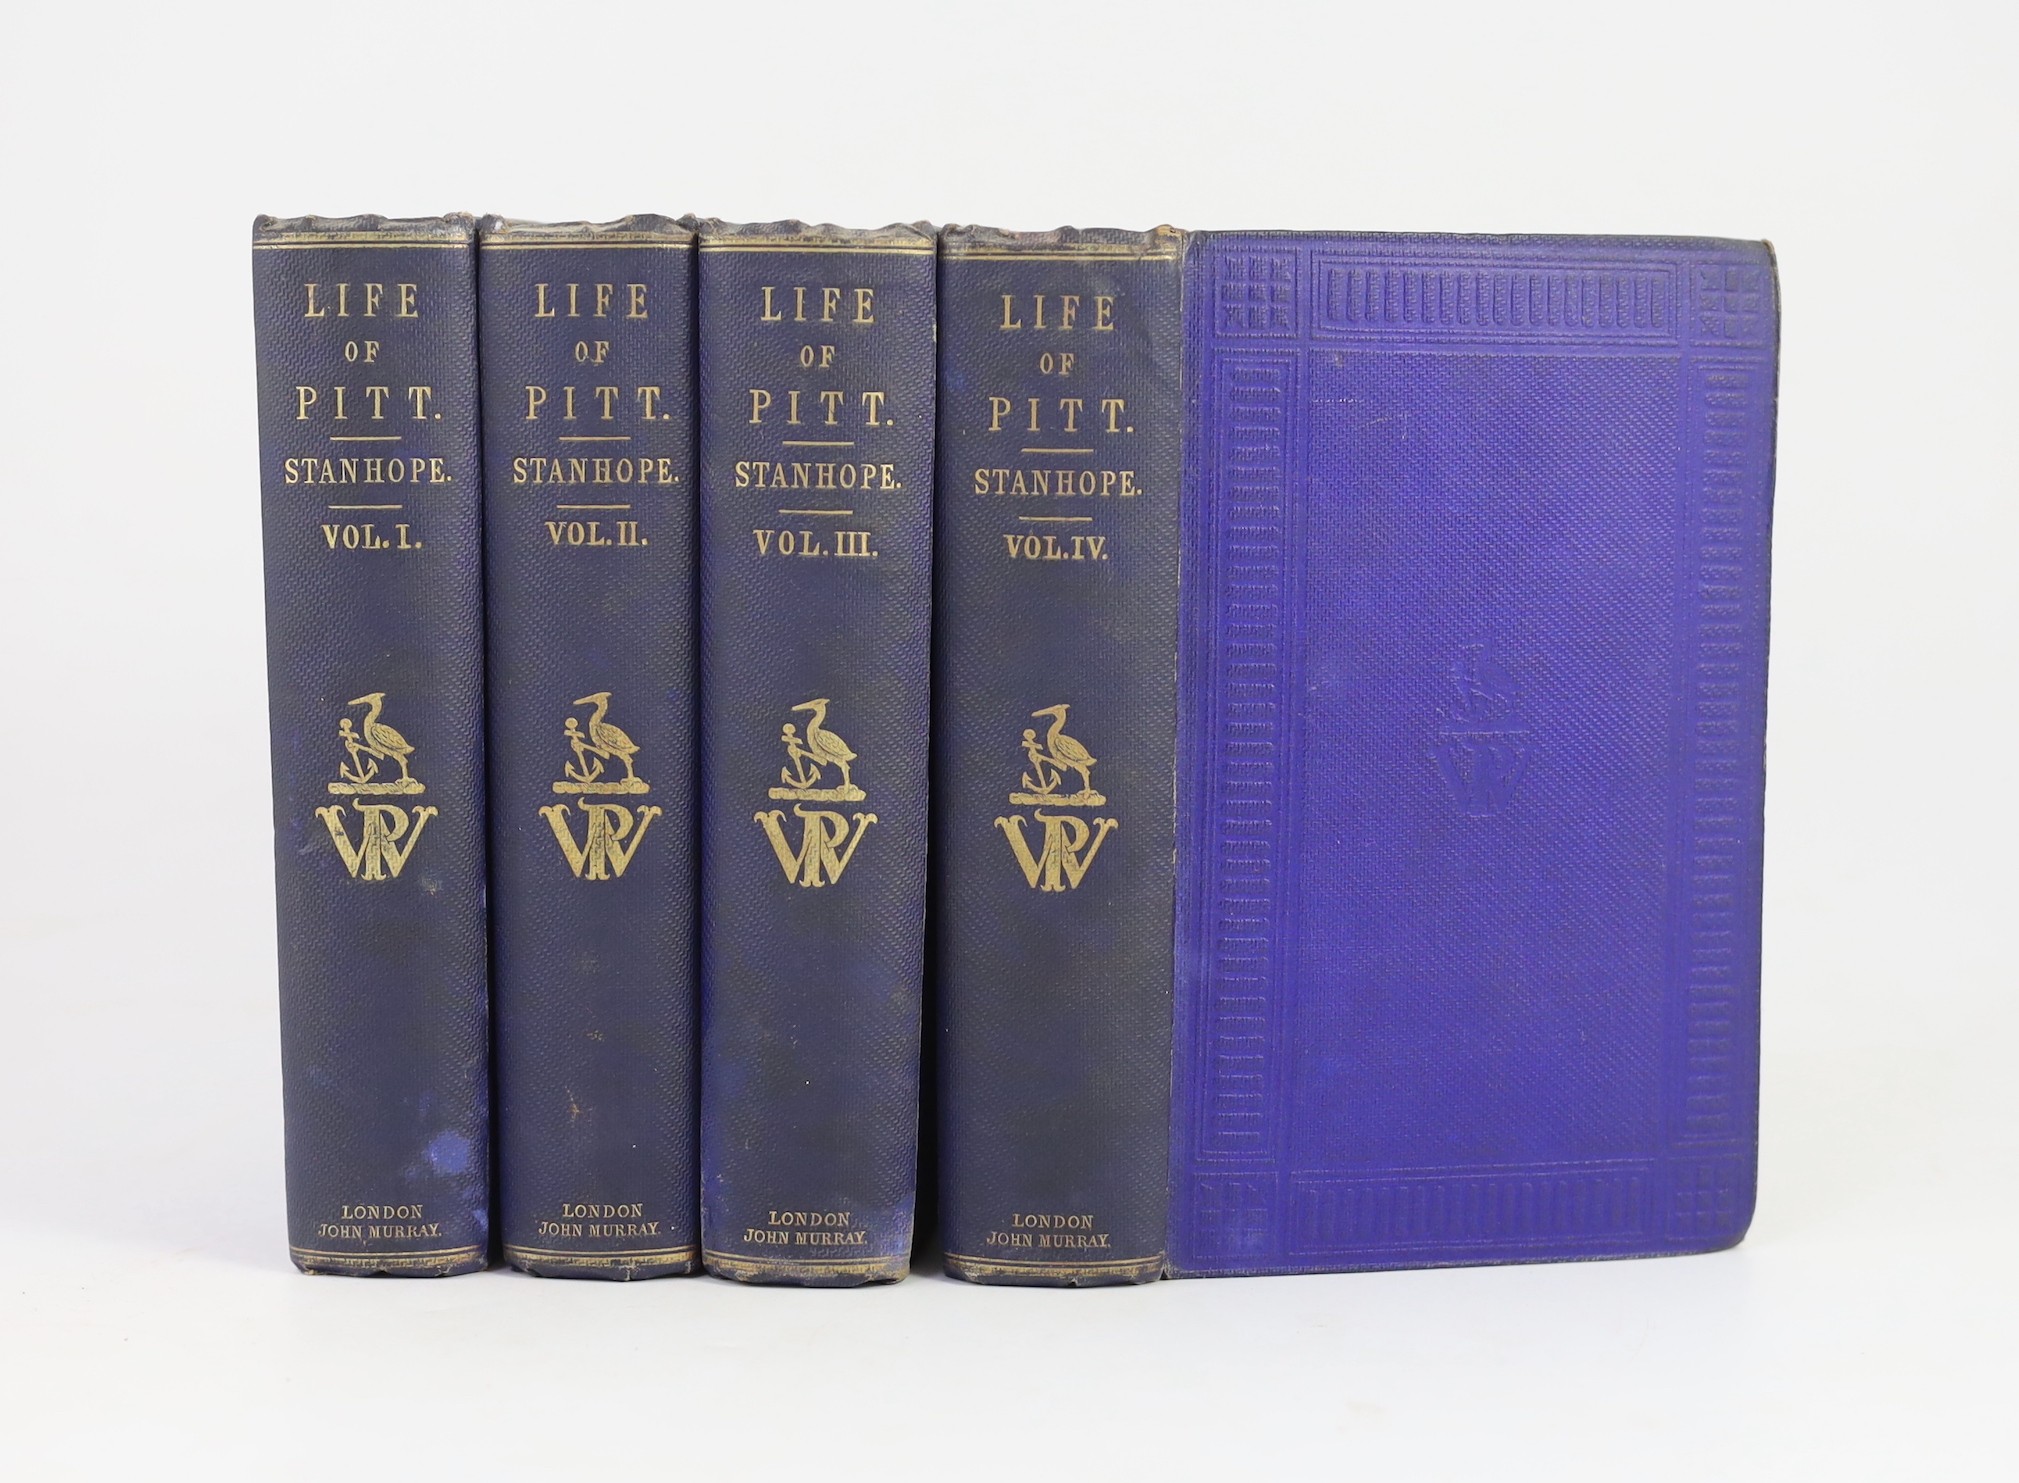 Stanhope, Philip Henry, 5th Earl Stanhope - Life of the Right Honourable William Pitt, 3rd edition, 4 vols, 8vo, cloth, John Murray, London, 1867 and Napier, W.F.P, Sir - History of the War in the Peninsula, 6 vols, 8vo,